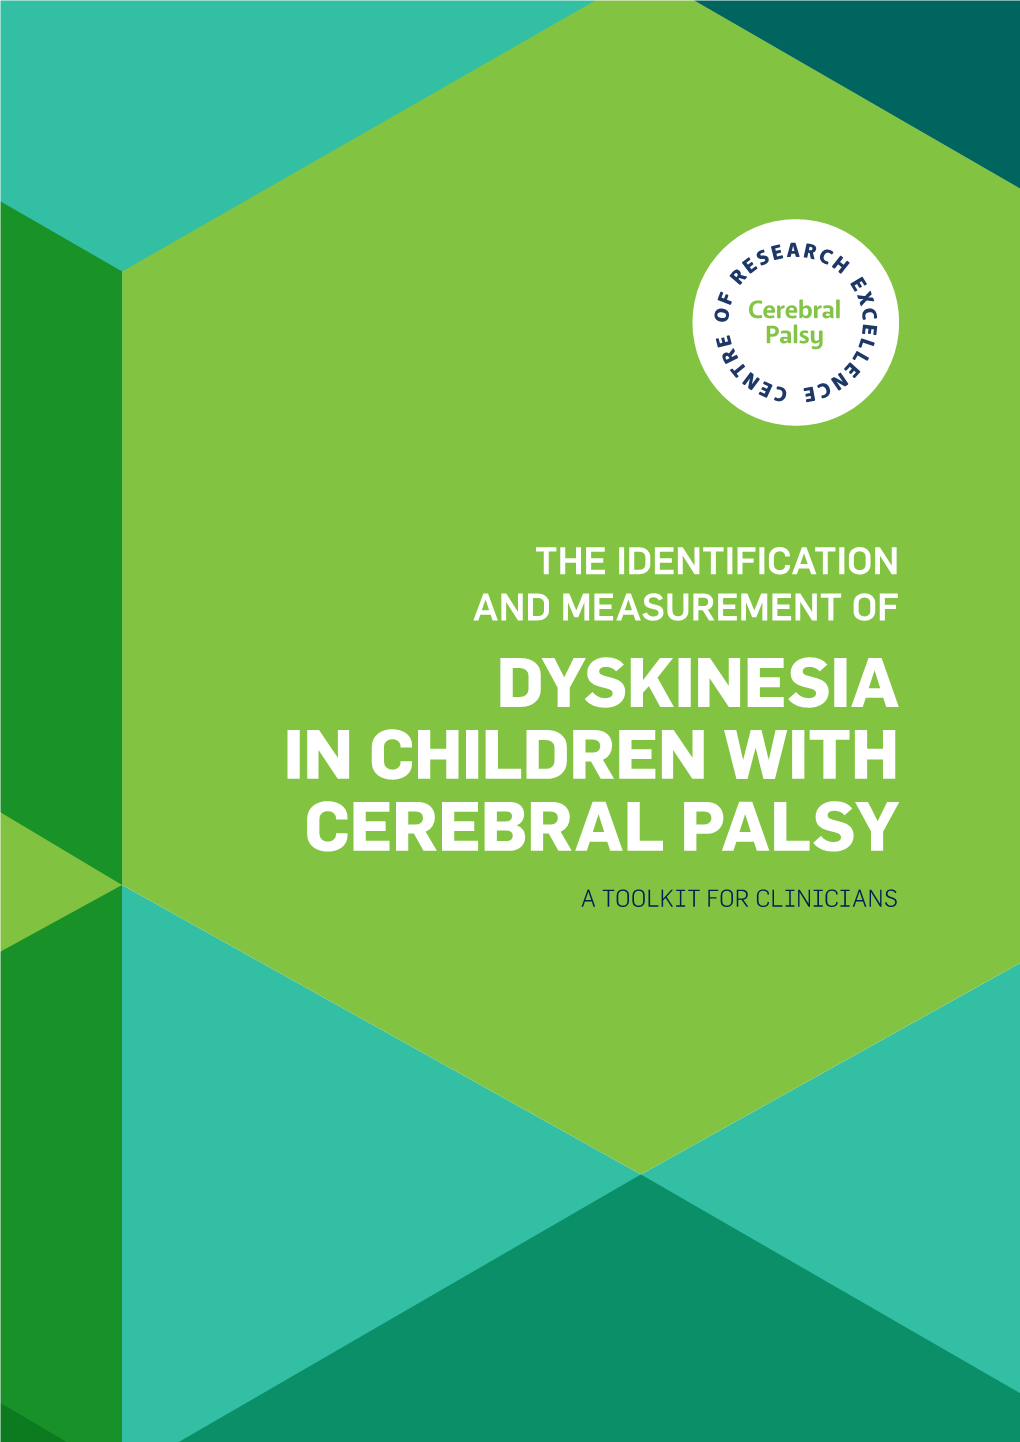 Dyskinesia in Children with Cerebral Palsy